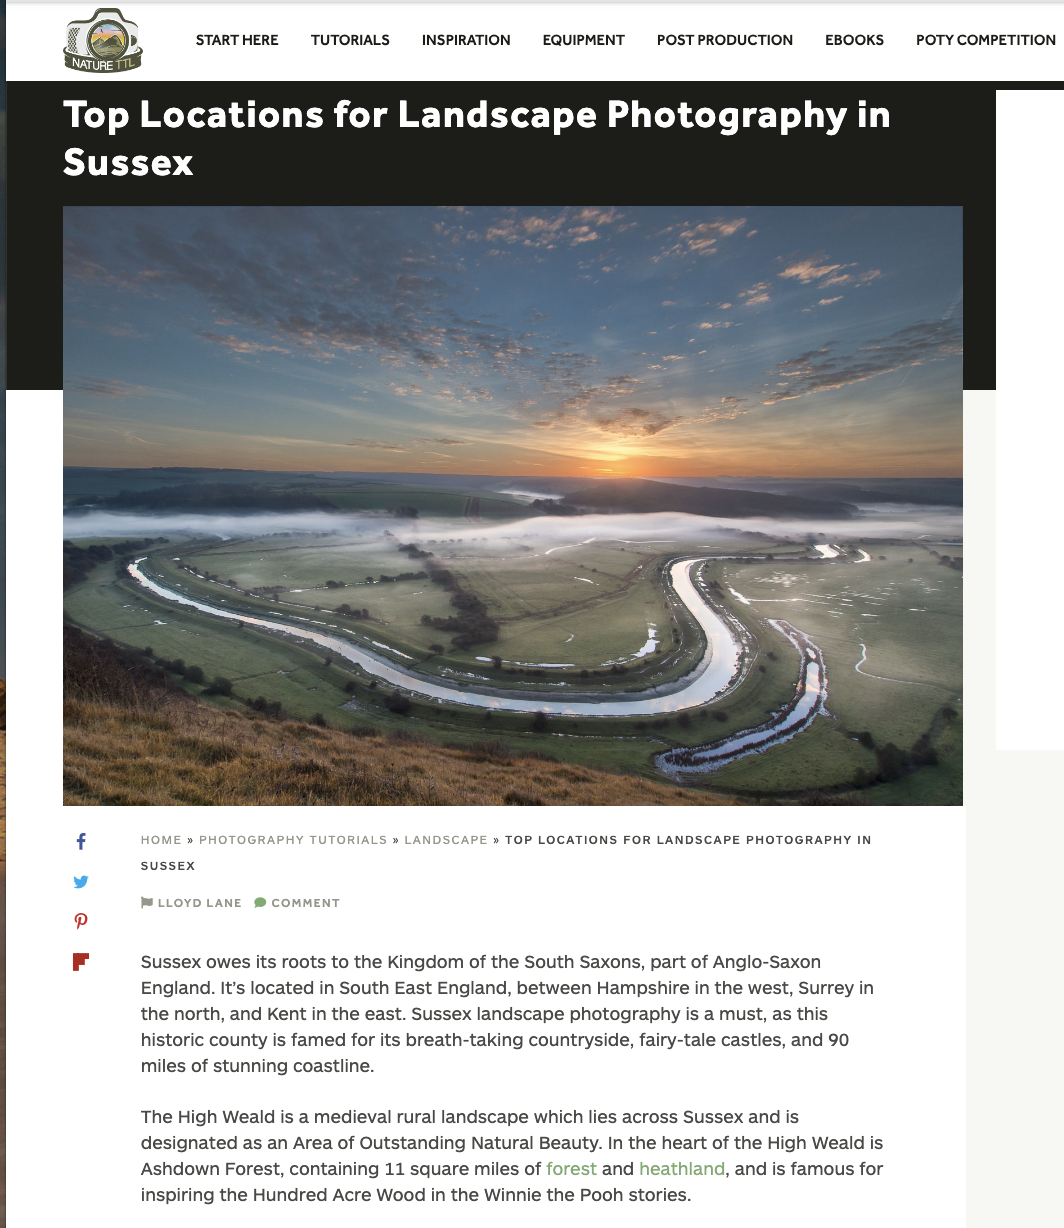 Sussex landscape photography locations